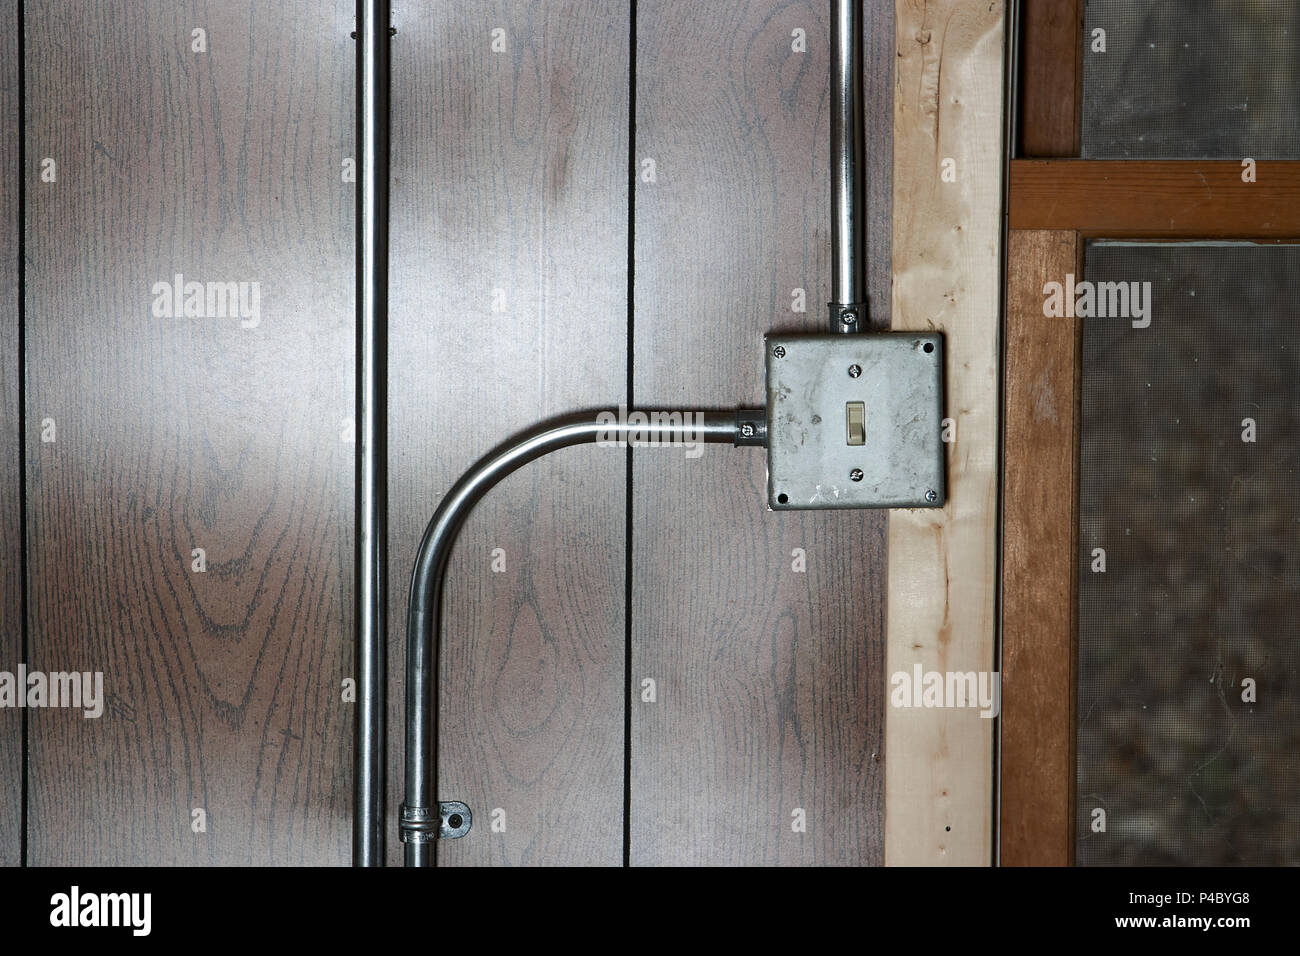 https://c8.alamy.com/comp/P4BYG8/old-vintage-metal-electricity-switch-and-junction-box-with-exposed-conduit-pipes-on-the-surface-mounted-on-a-wooden-wall-alongside-a-door-P4BYG8.jpg